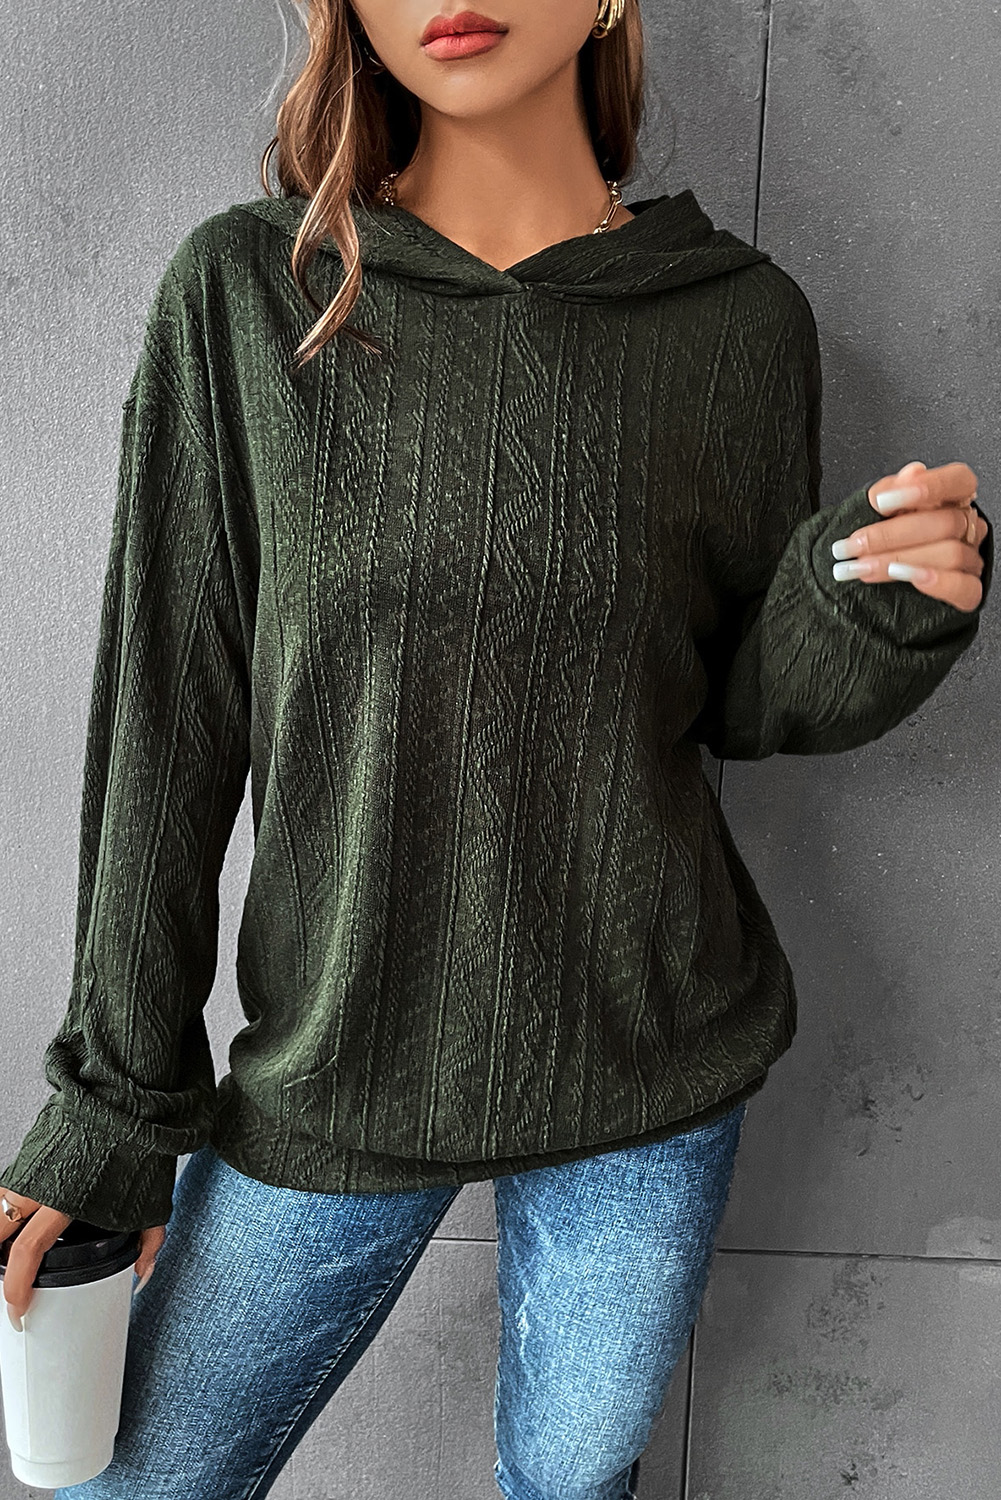 Shewin Wholesale High Quality Duffel Green Textured Knit Pullover Hoodie